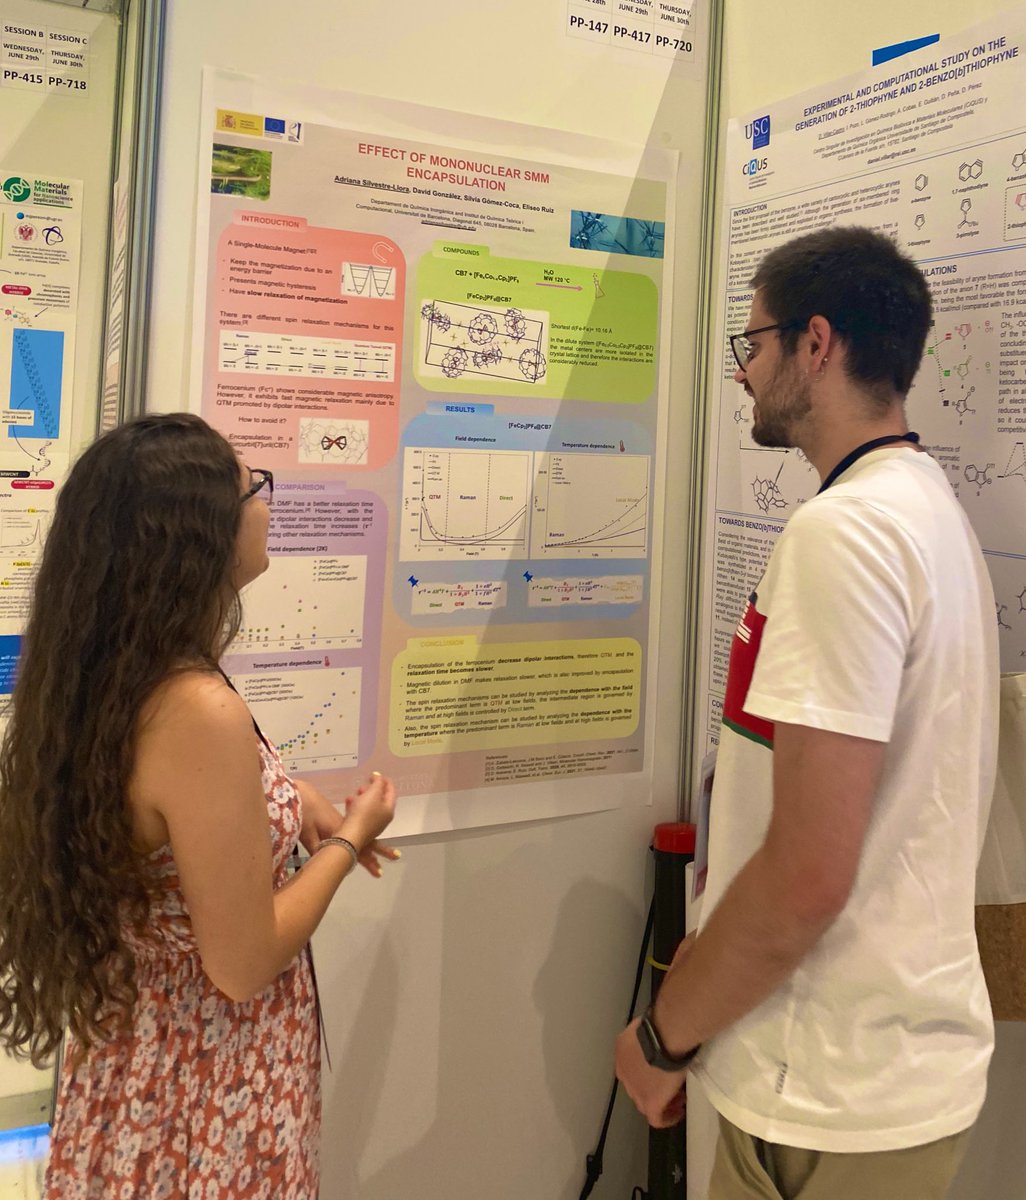 Today my first poster presentation at @BienalGranada22 Really happy to share a bit of my work. Thanks @RSEQUIMICA for the opportunity.#BienalRSEQ2022